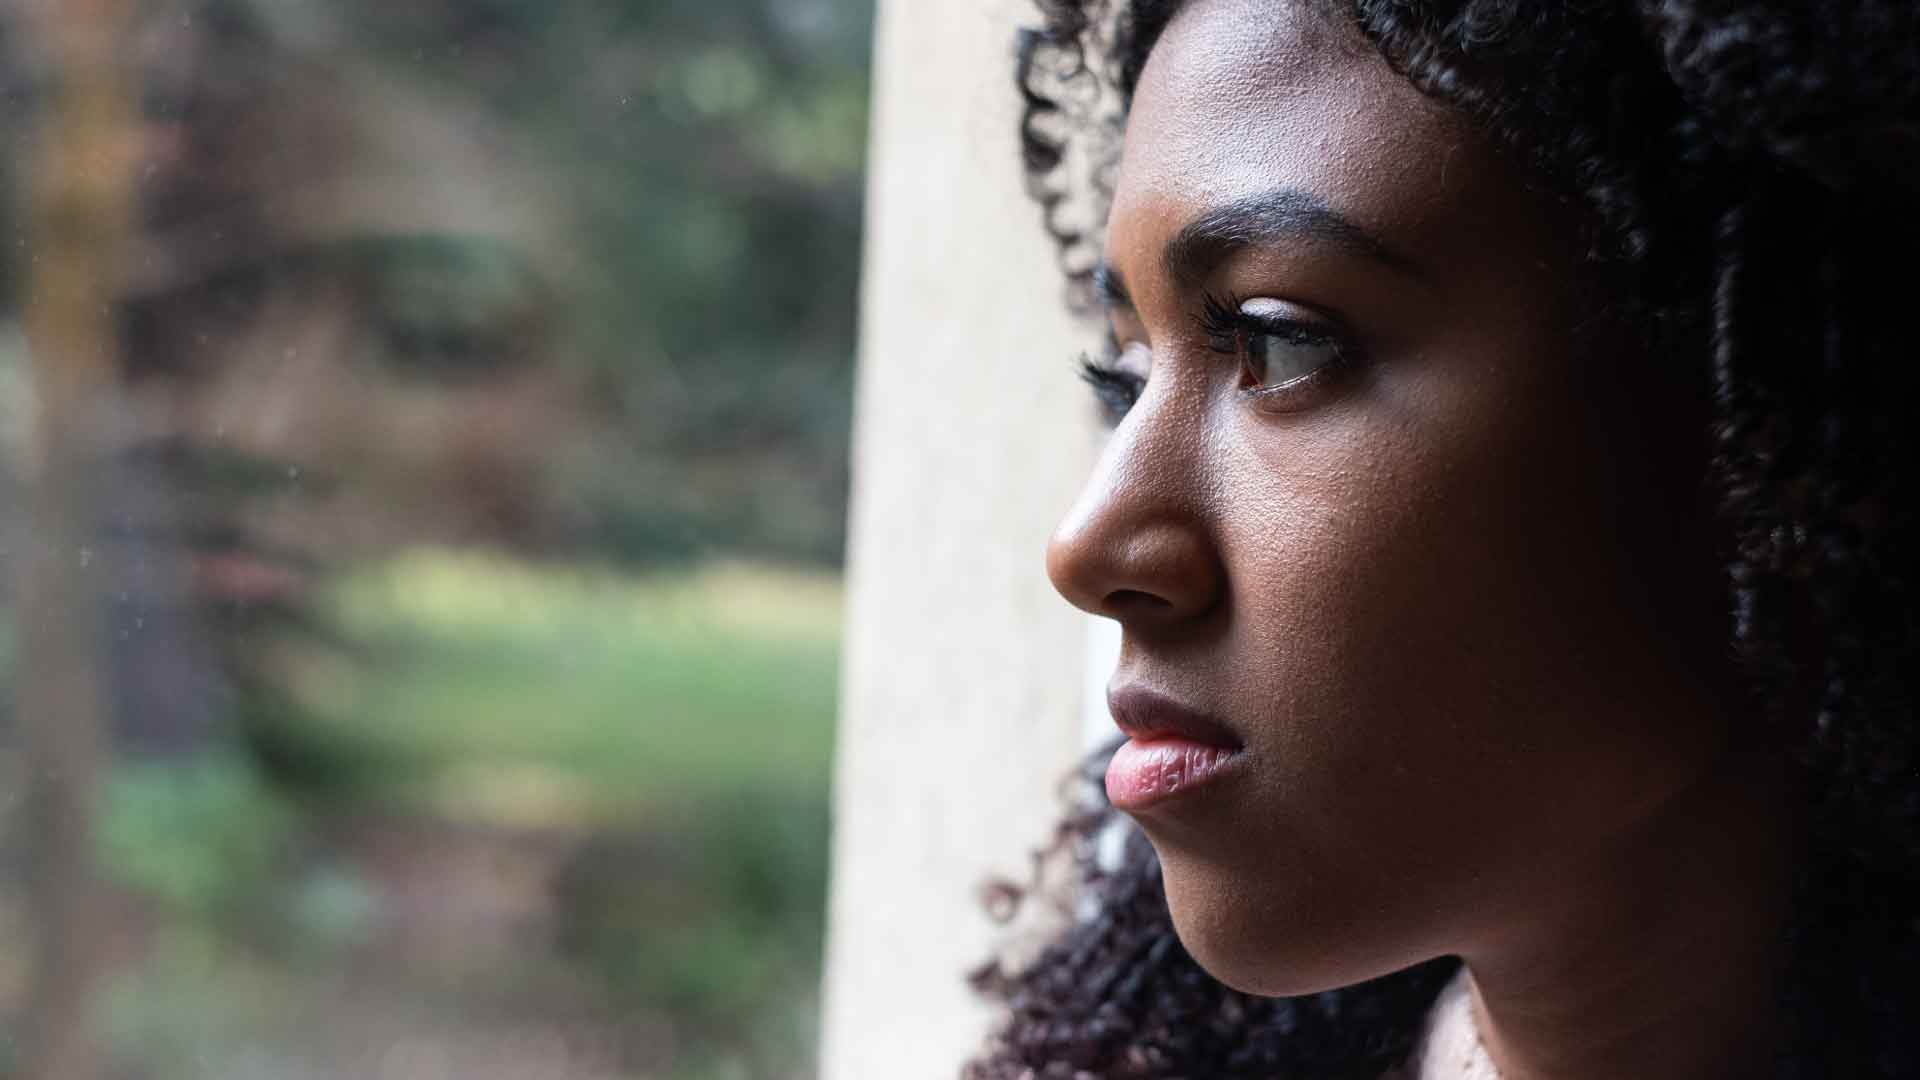 Person looking out of window with a pensive expression